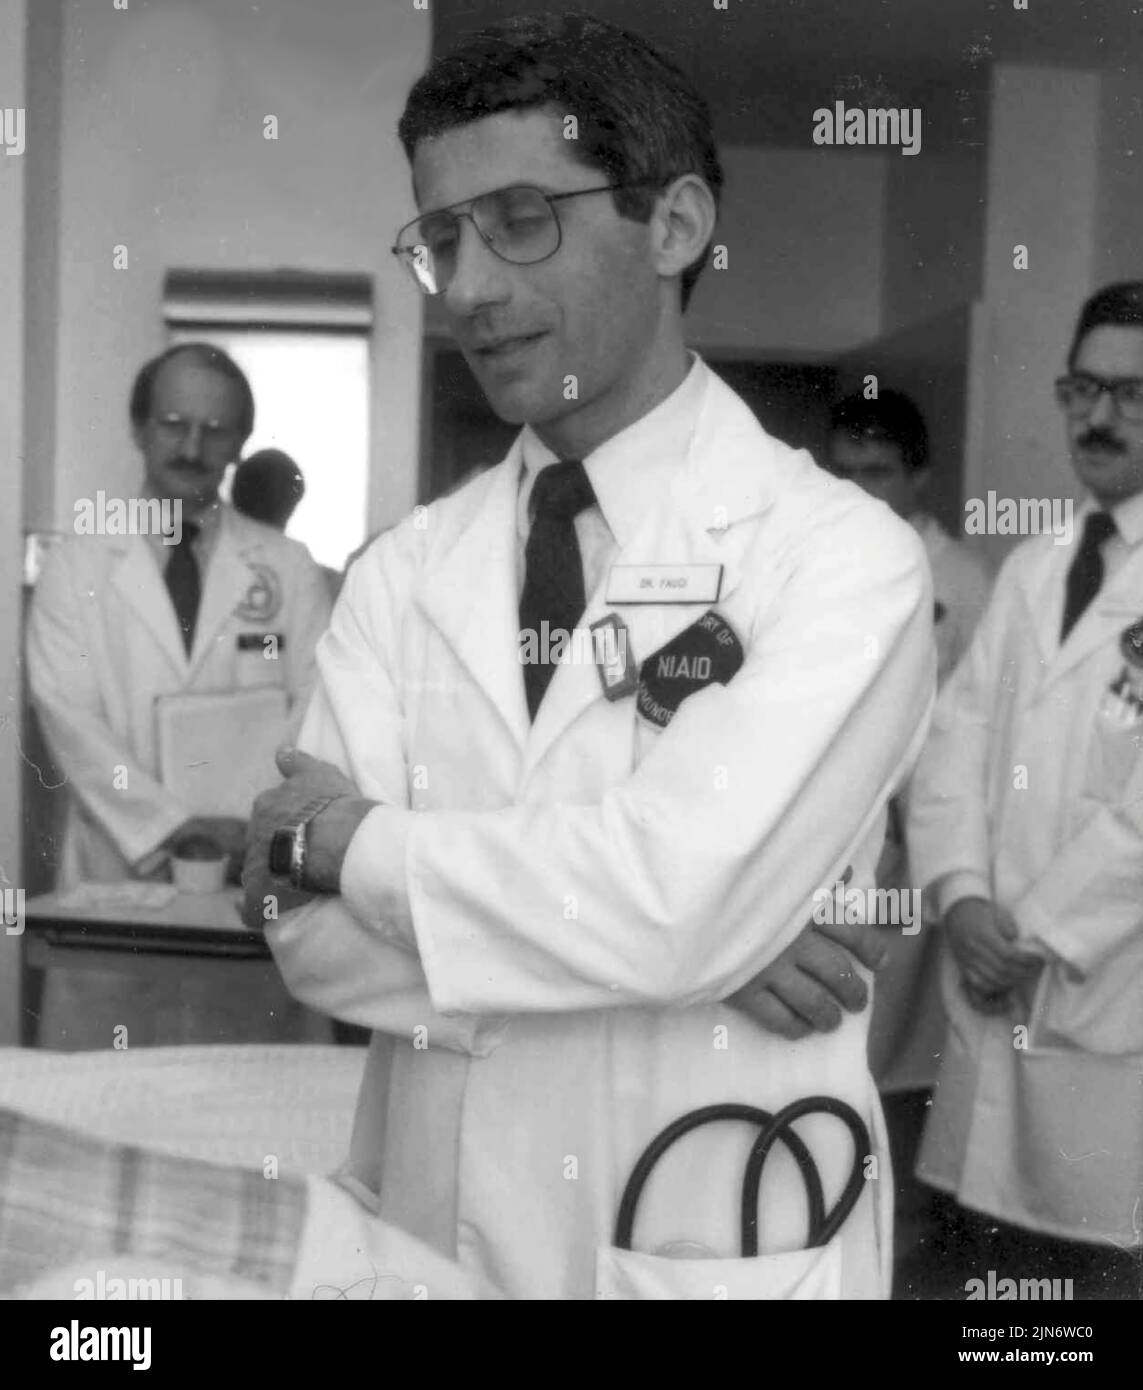 Anthony Fauci During the Early Years of the AIDS Epidemic Dr. Anthony Fauci consulting with an AIDS patient, 1987. Credit: NIAID Stock Photo